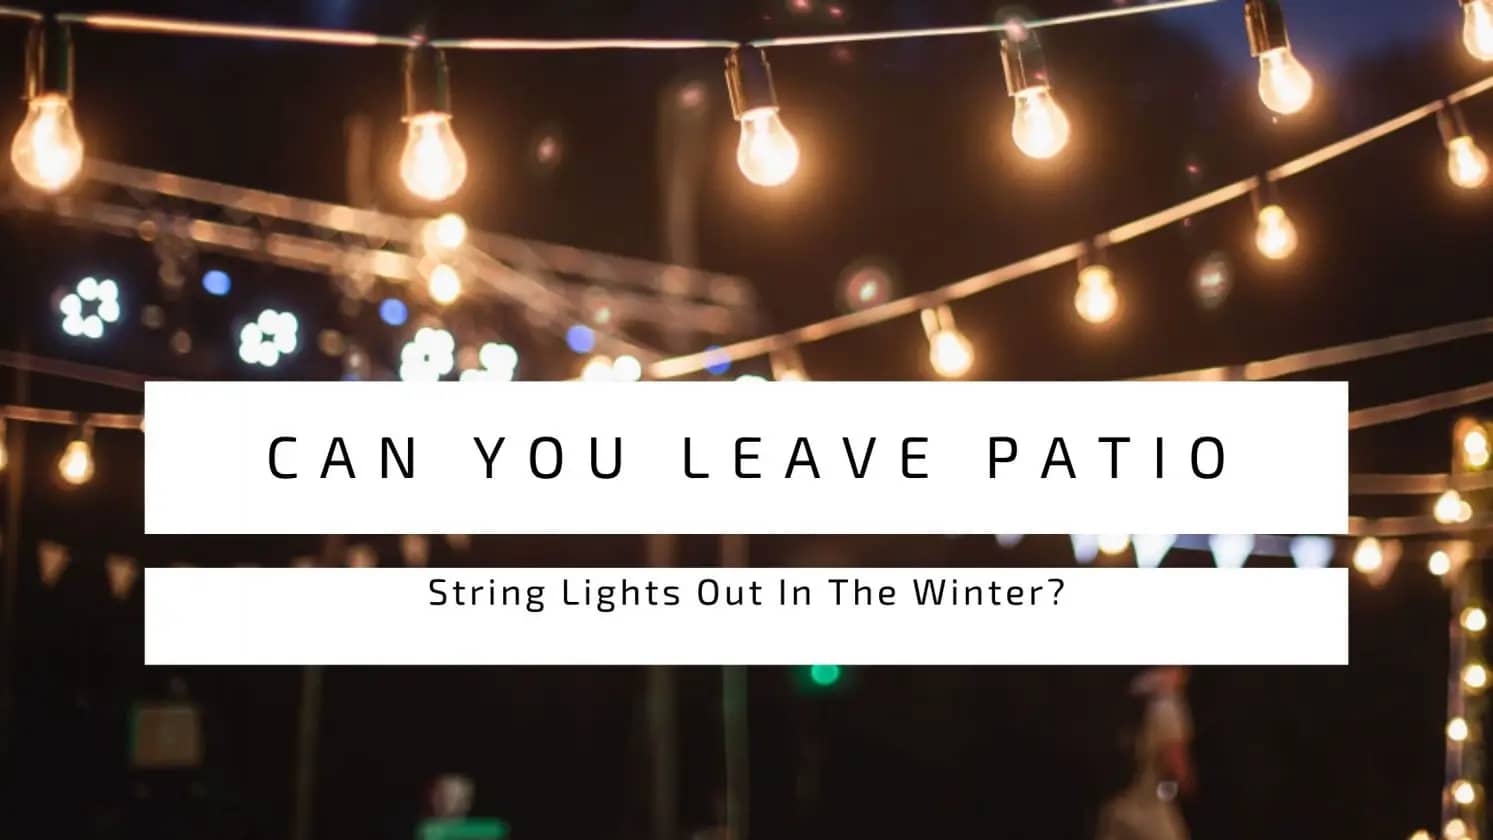 Can You Leave Patio String Lights Out In Winter?